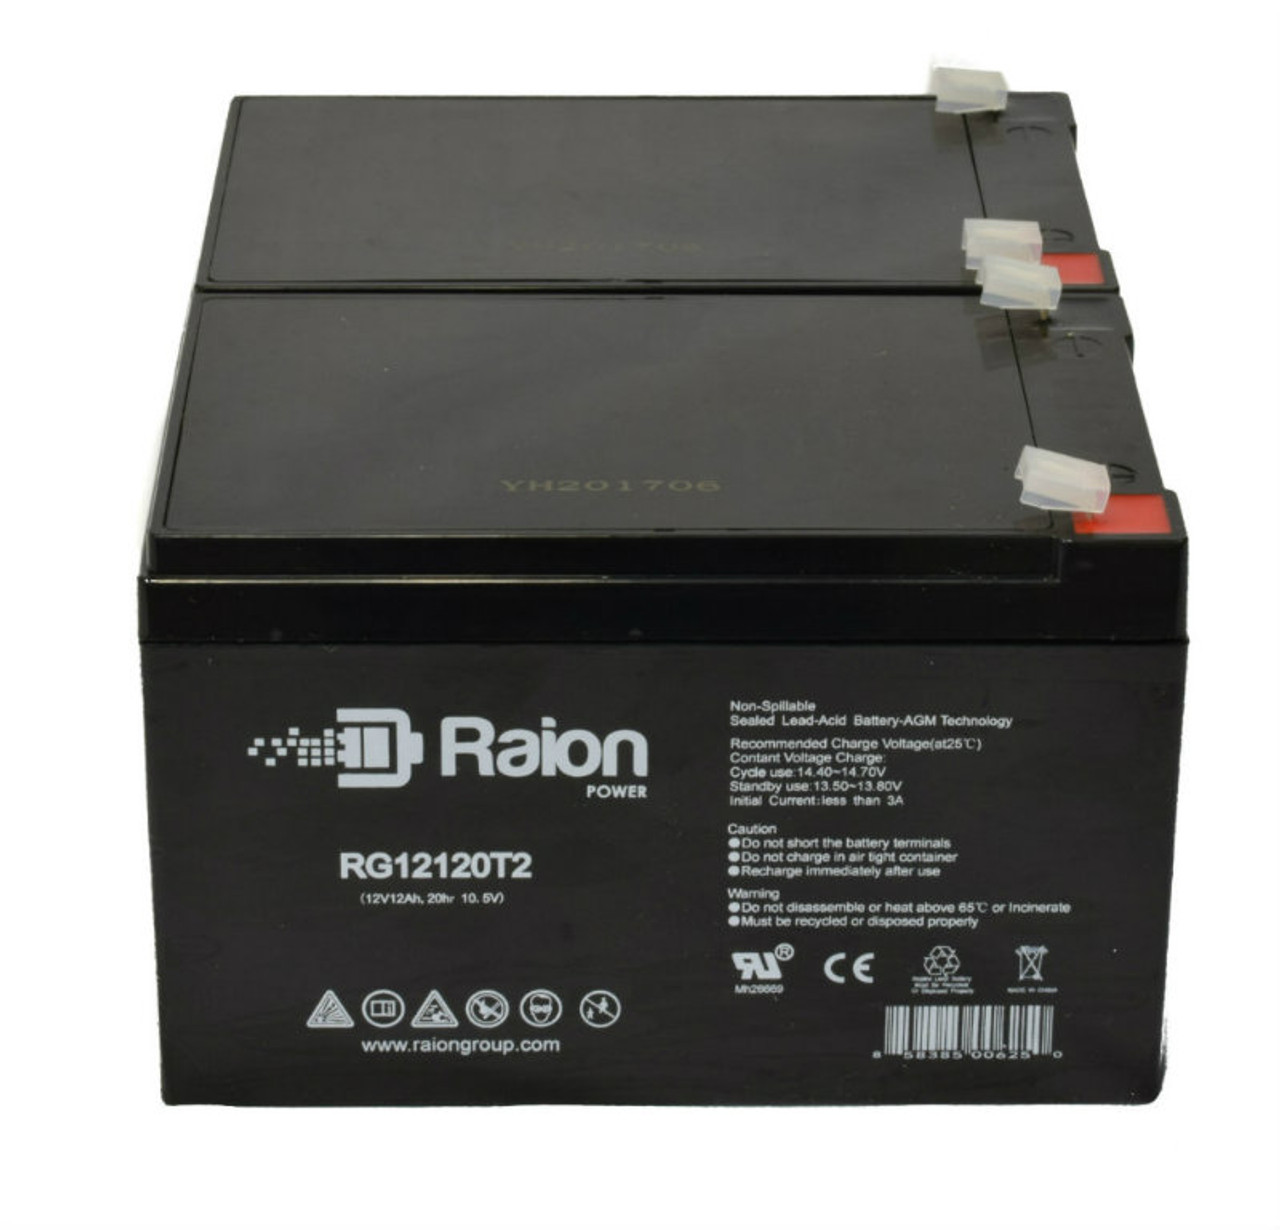 Raion Power 12V 12Ah Non-Spillable Compatible Replacement Battery for BladeZ Powerboard XTR 300 - (2 Pack)